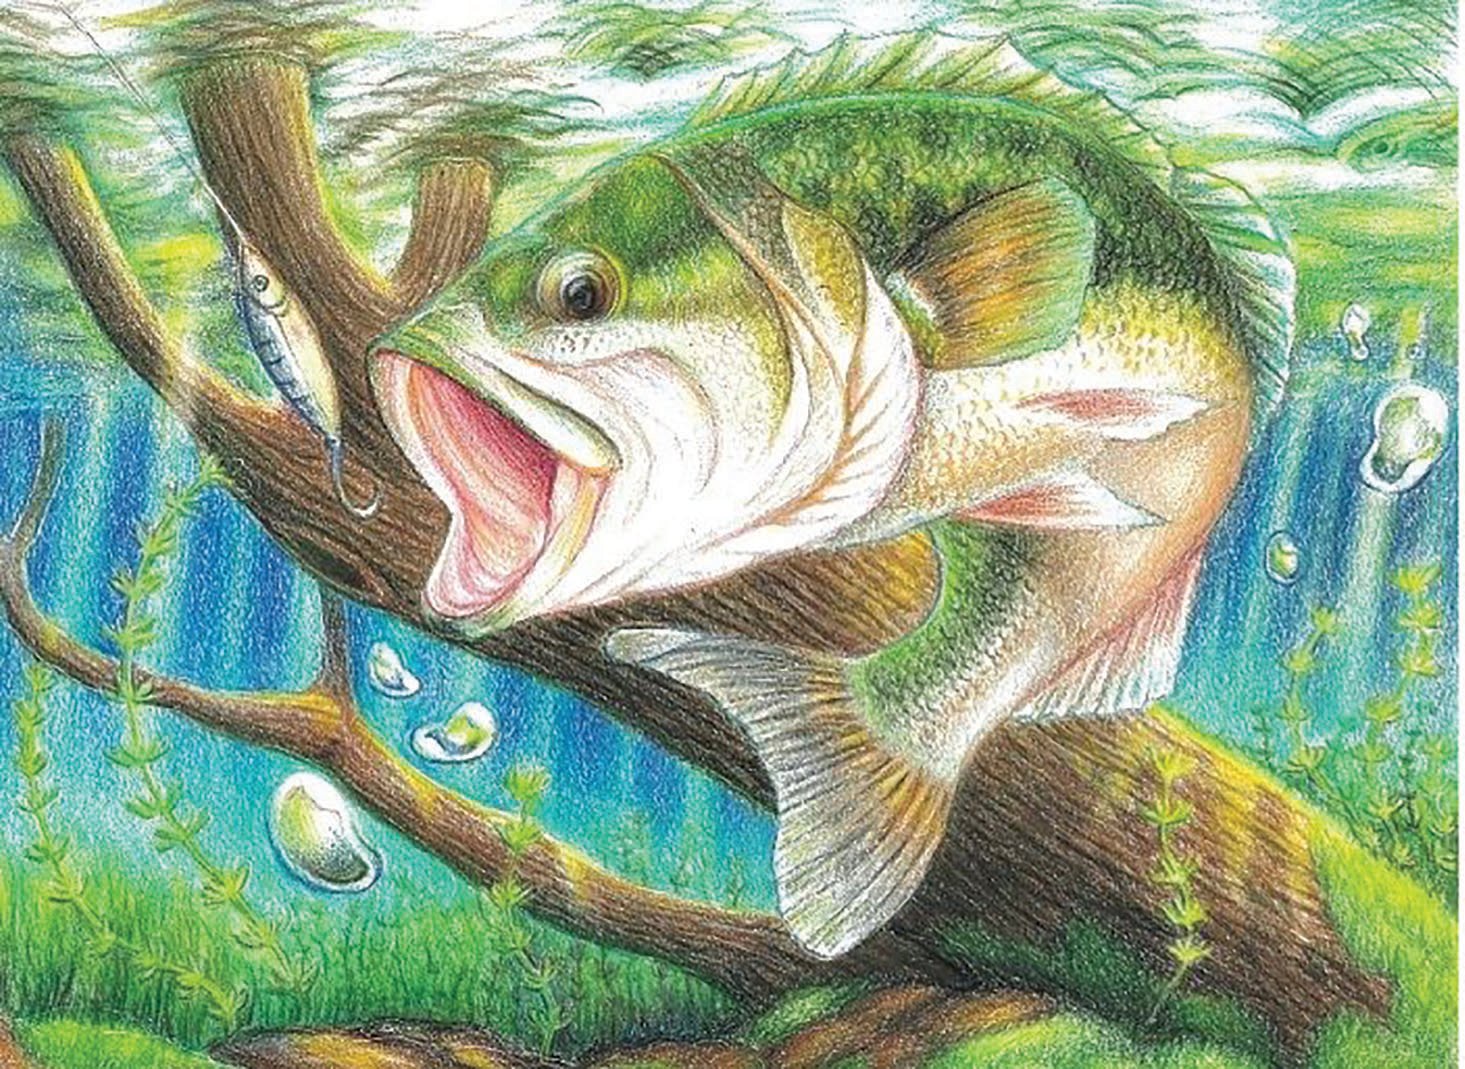 Students in kindergarten through 12th grade can compete in this free Florida State-Fish Art Contest. The deadline to enter is March 31, 2021.